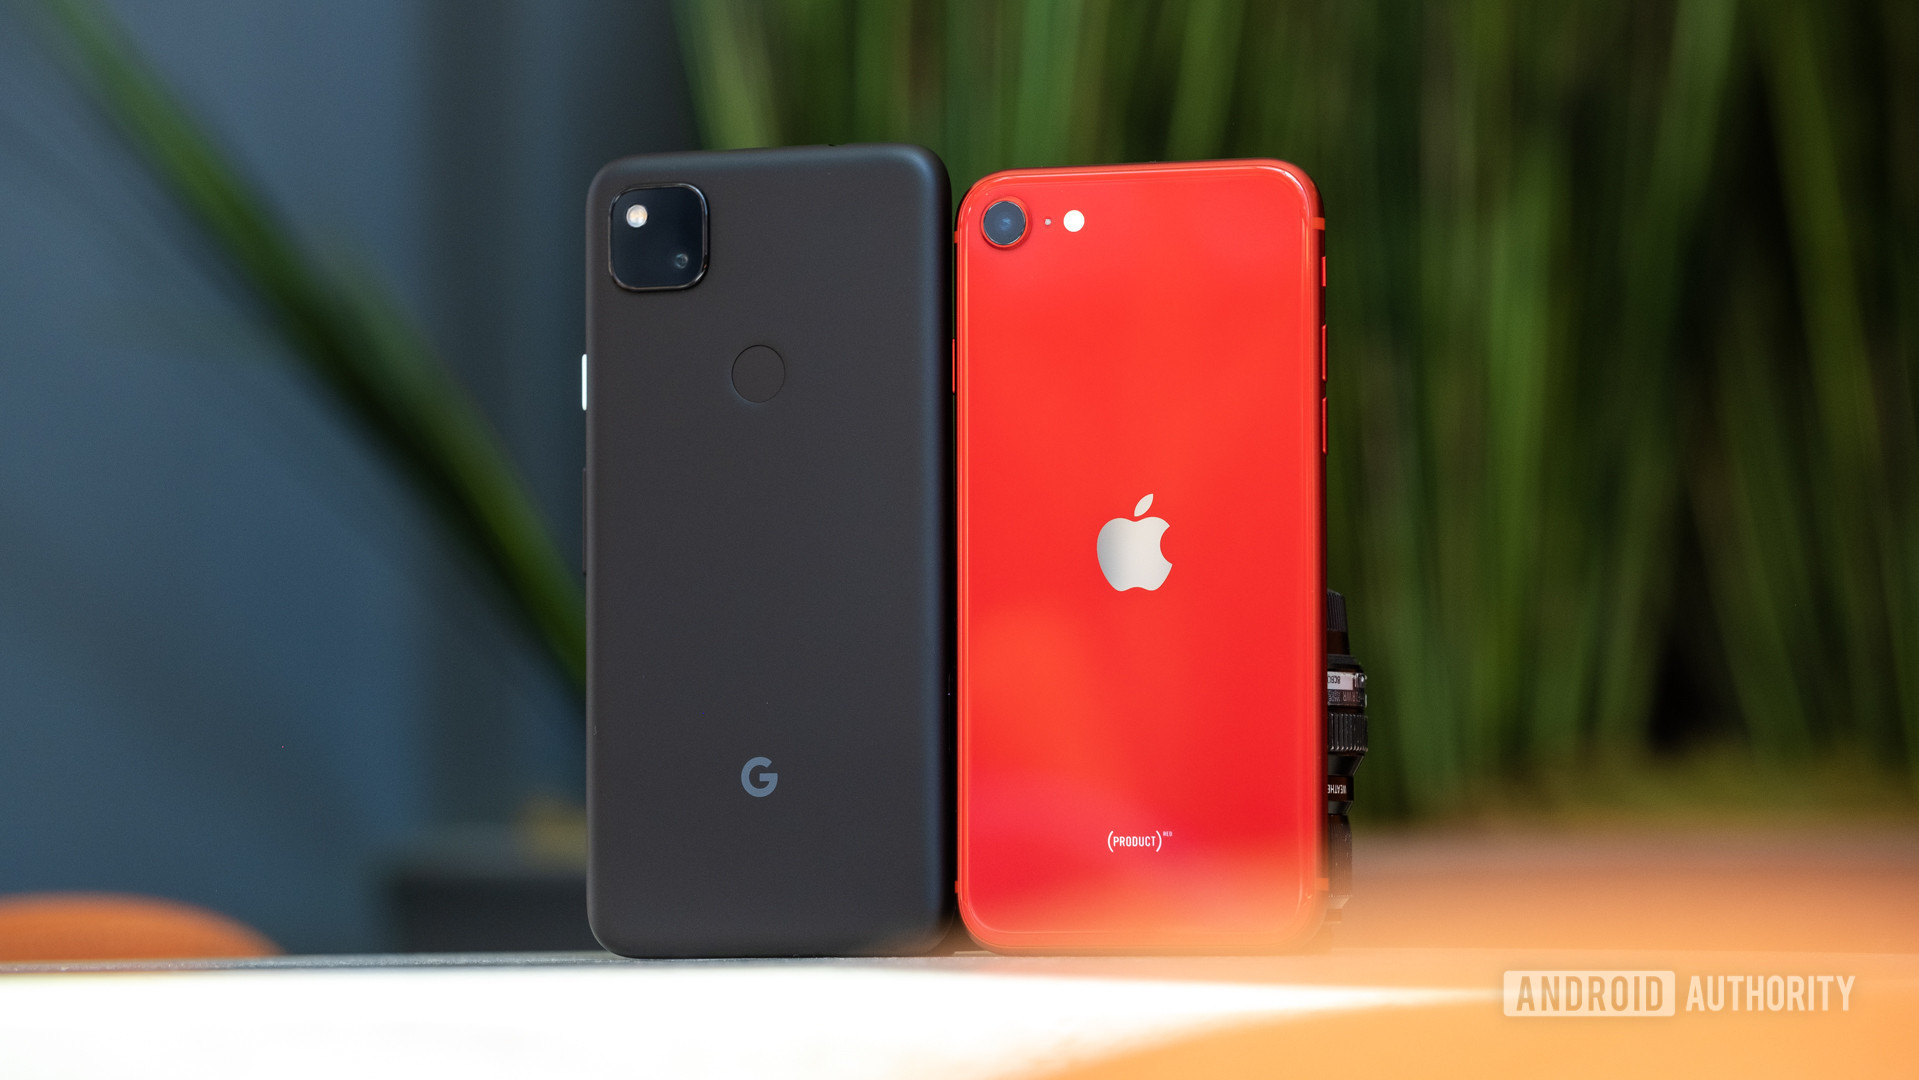 A photo of the Google Pixel 4a alongside the Apple iPhone SE